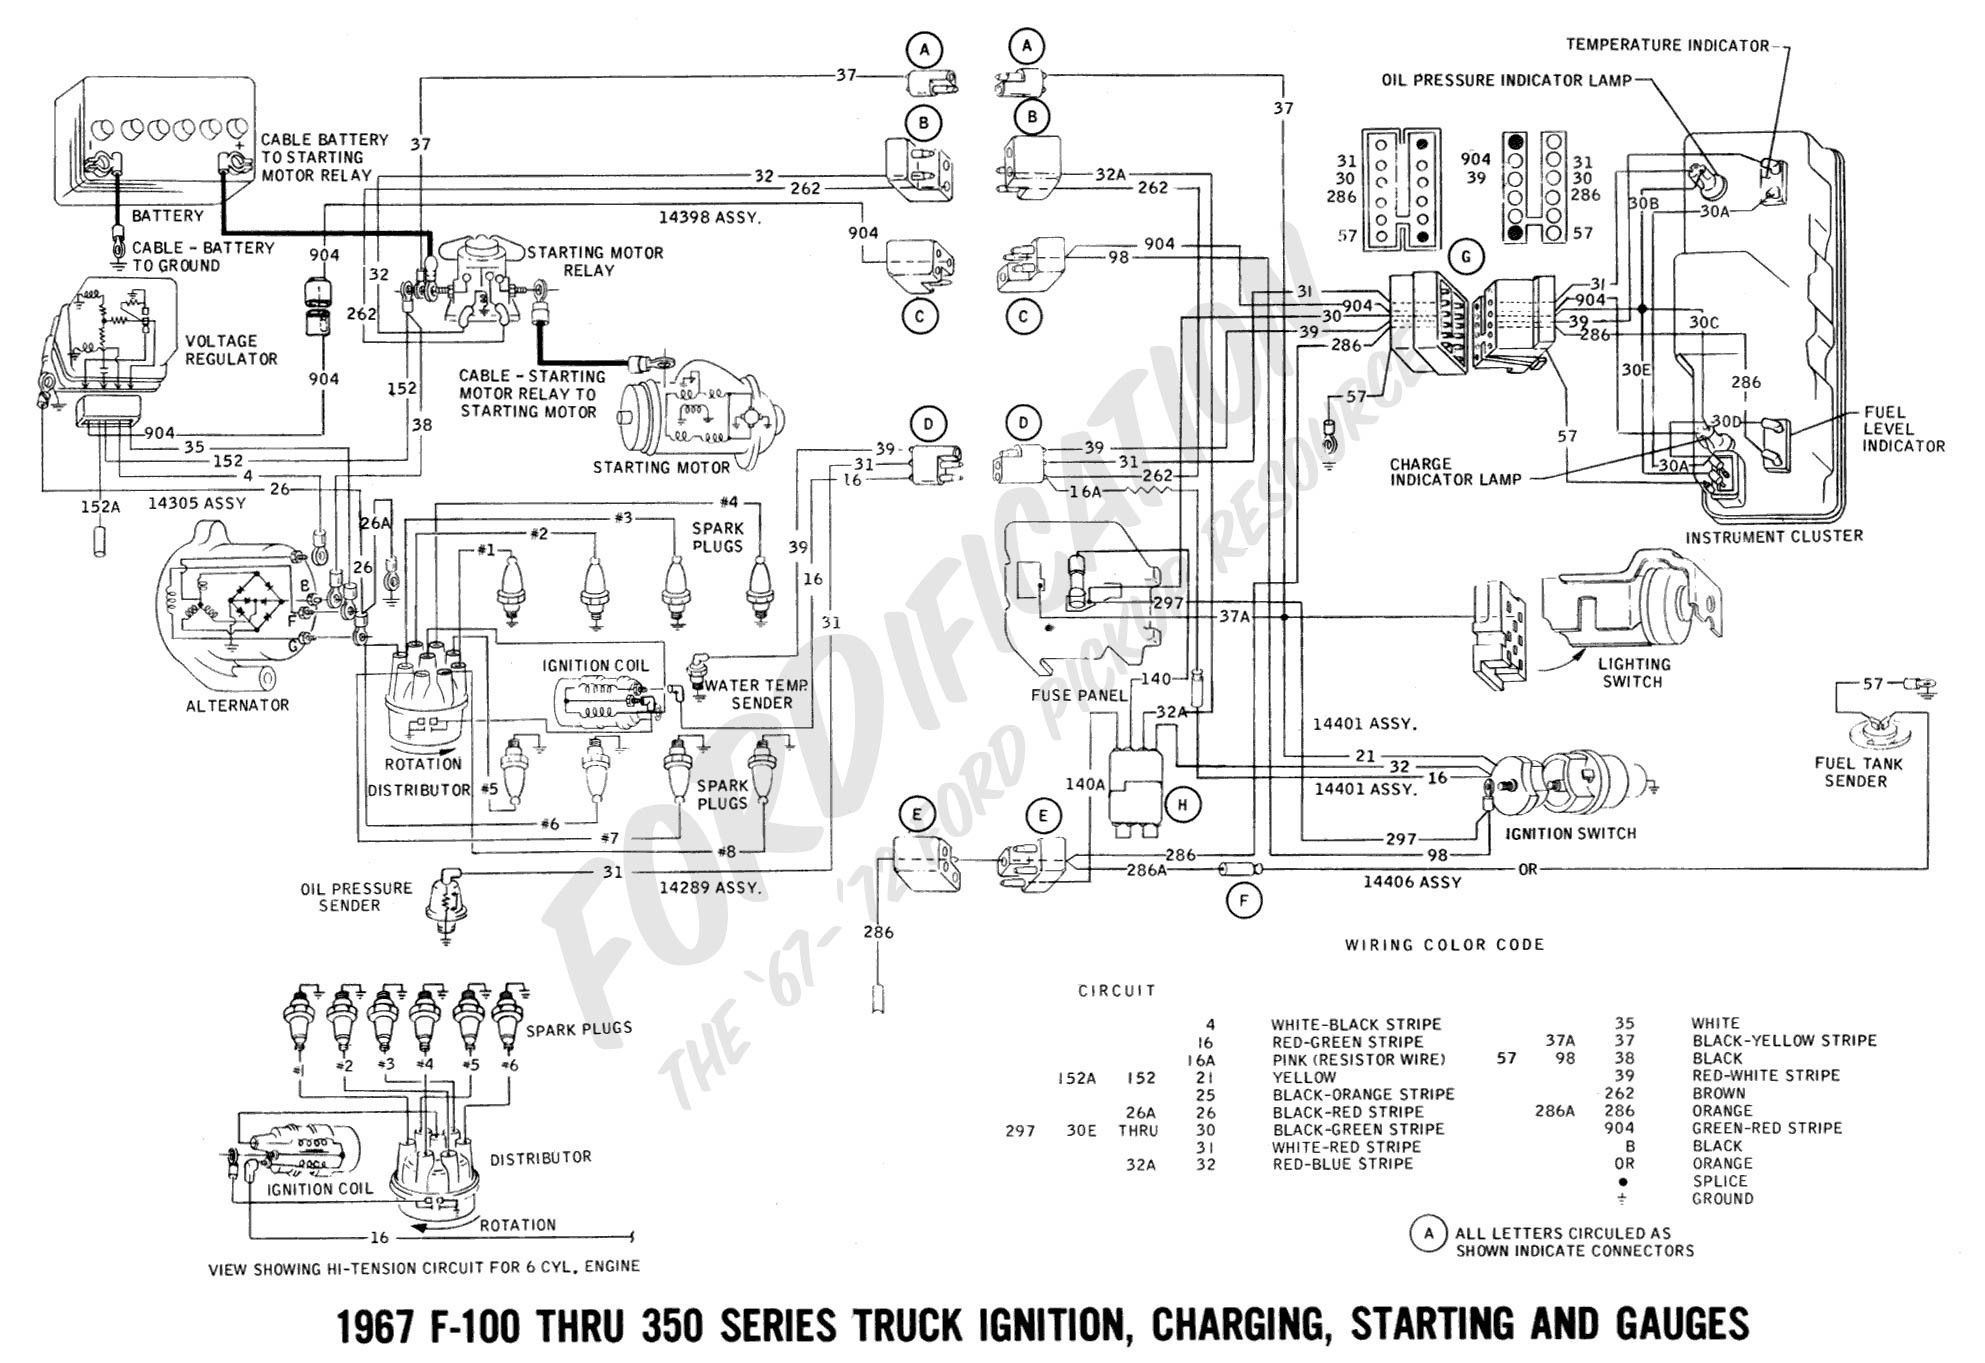 1968 Mustang Wiring Diagram ford Truck Technical Drawings and Schematics Section H Wiring Of 1968 Mustang Wiring Diagram